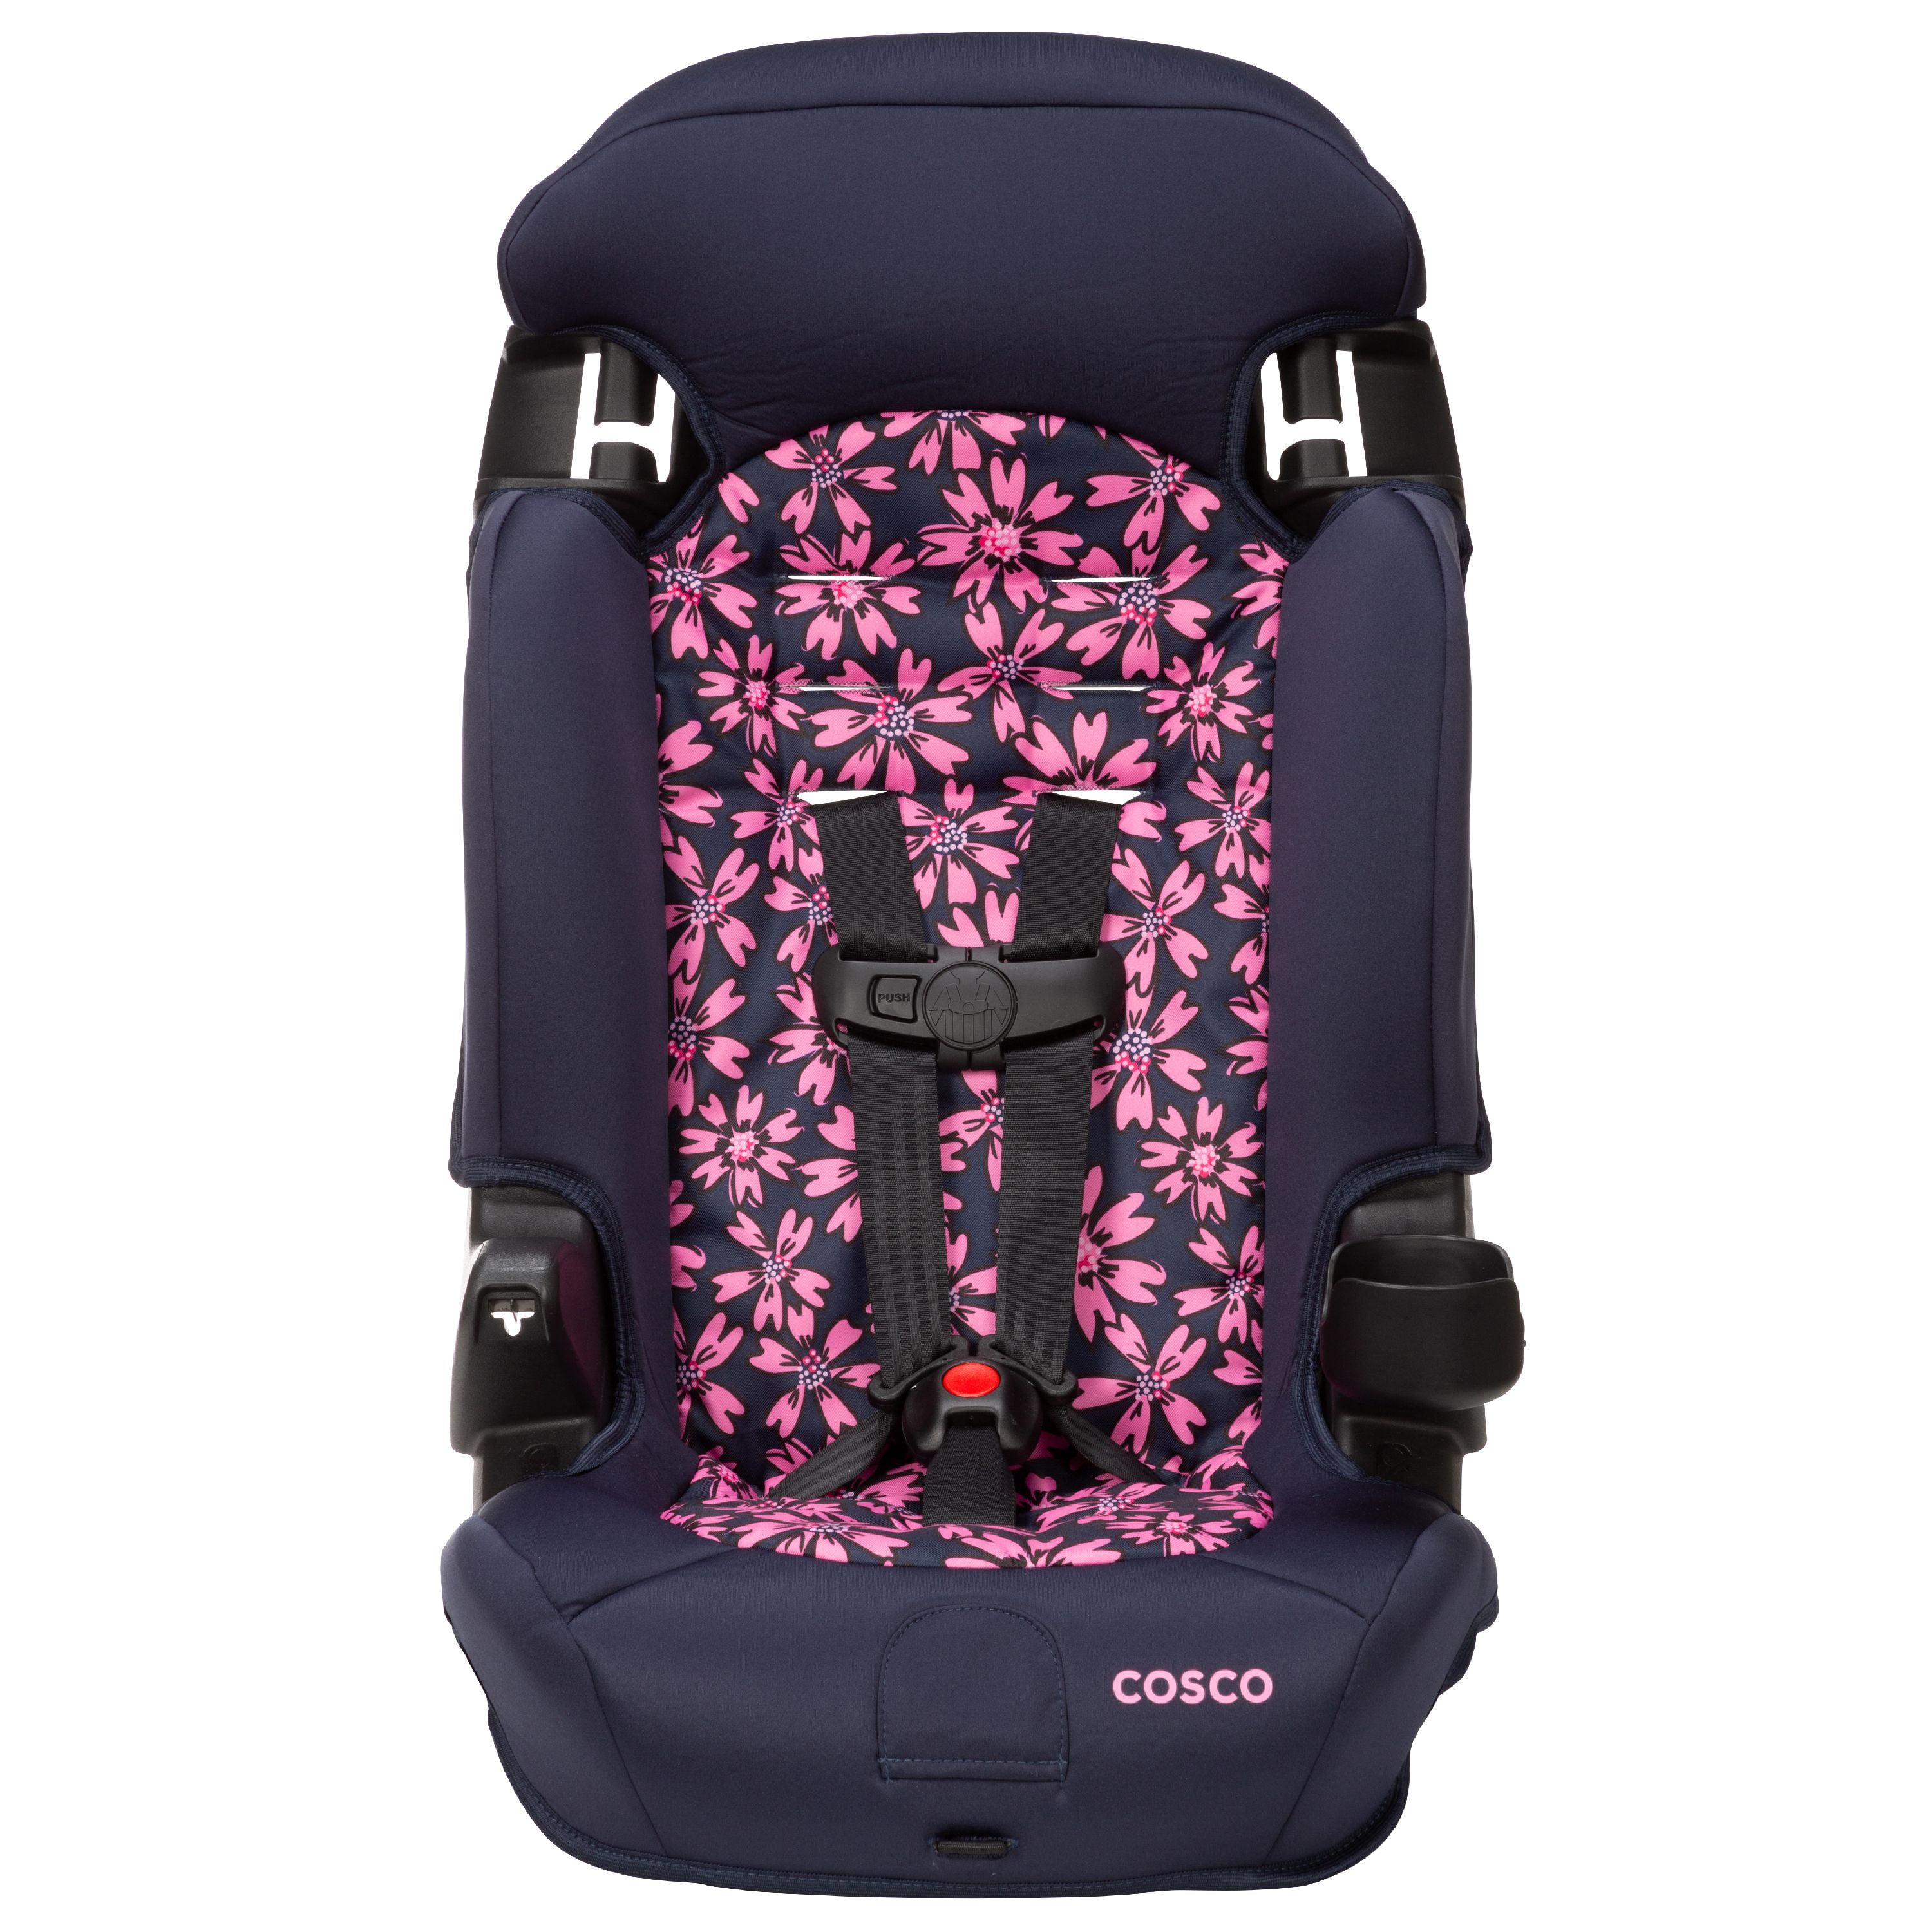 cosco-finale-2-in-1-booster-car-seat-pink-amaryllis-walmart